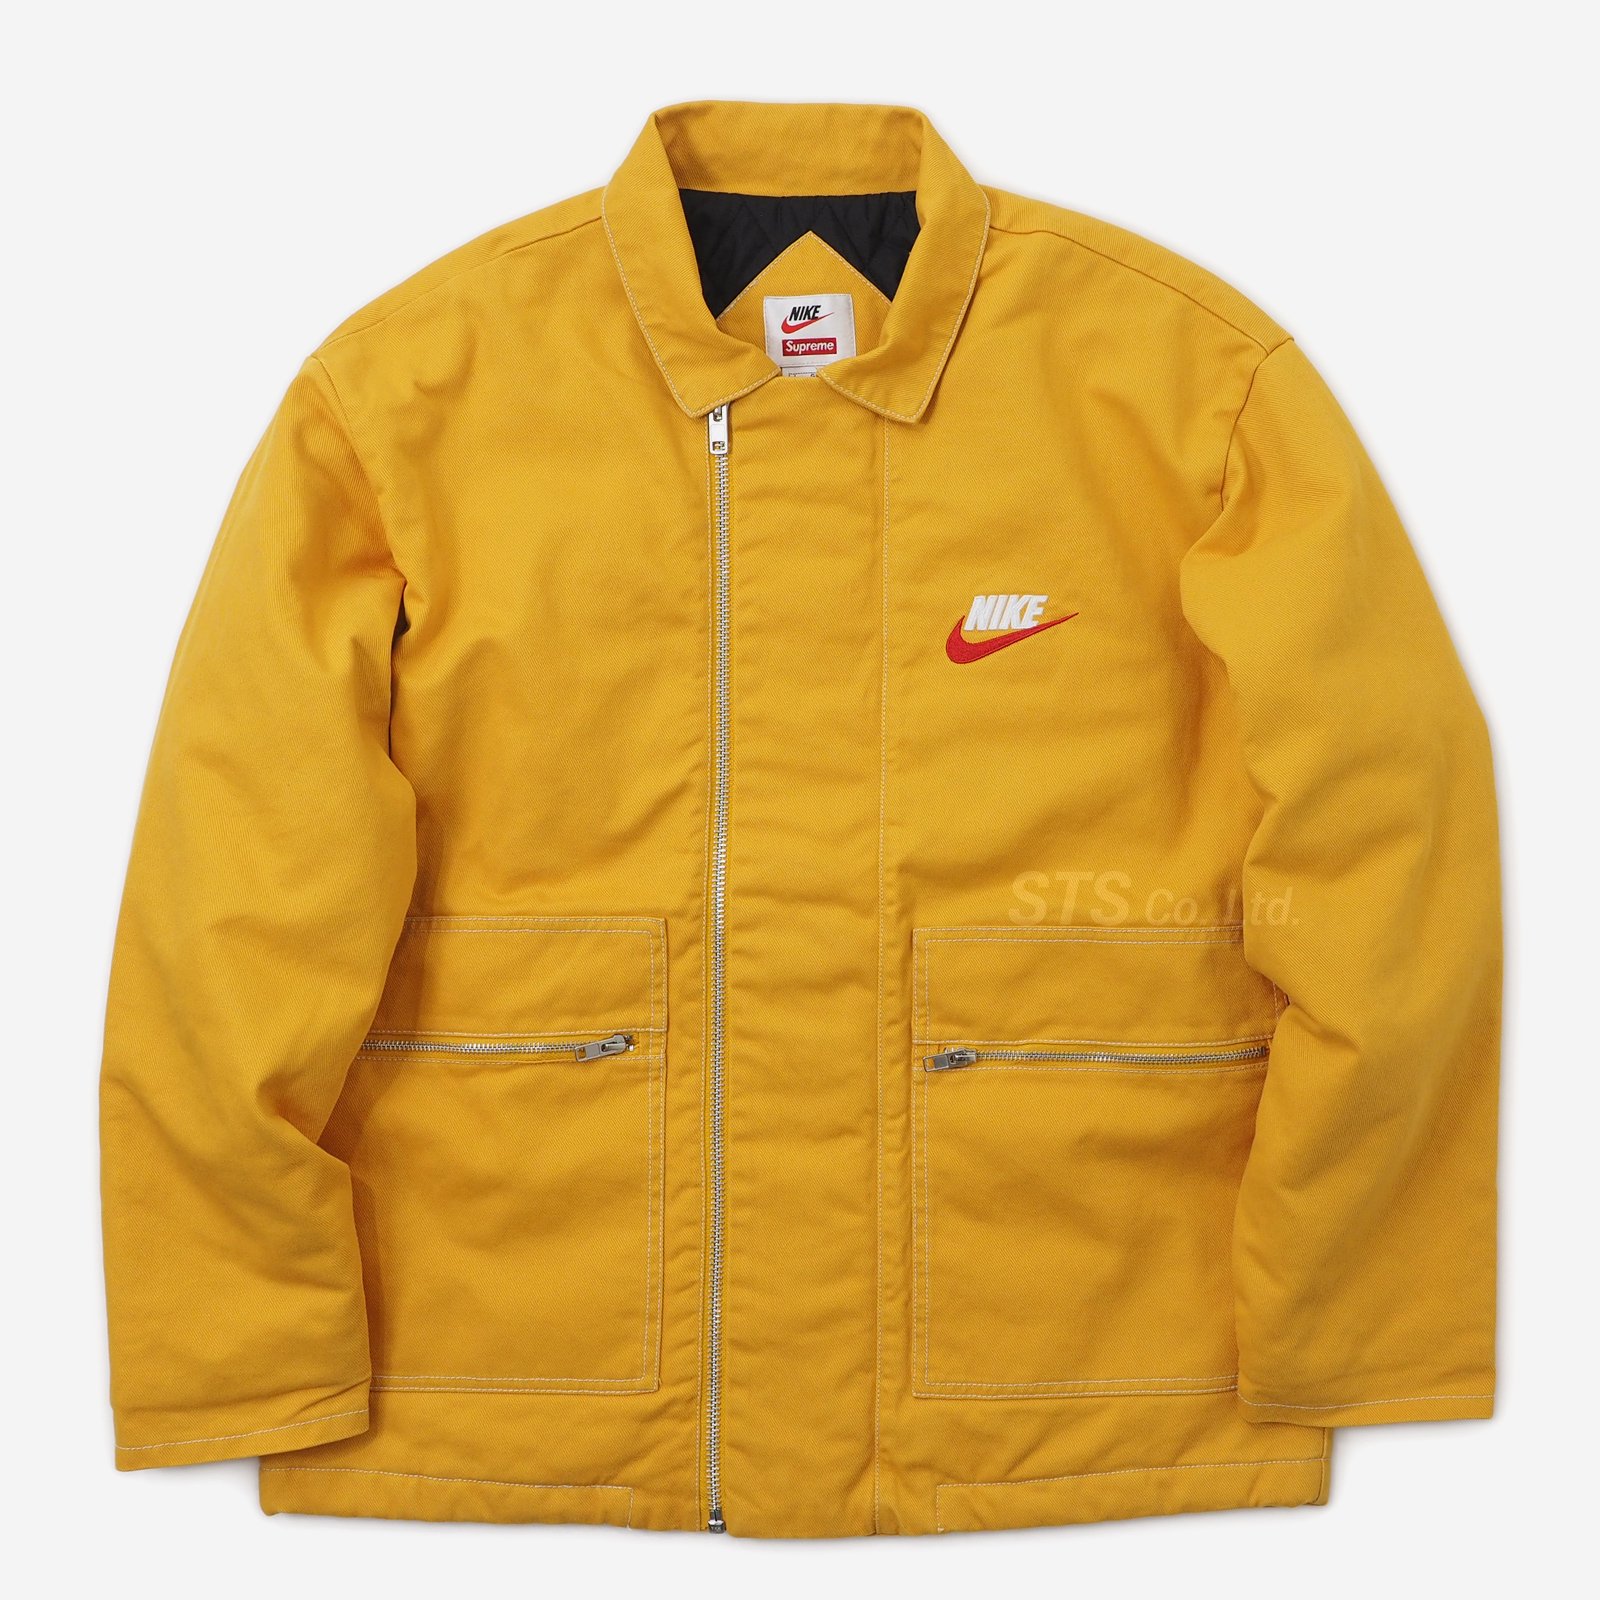 Supreme/Nike Double Zip Quilted Work Jacket - ParkSIDER